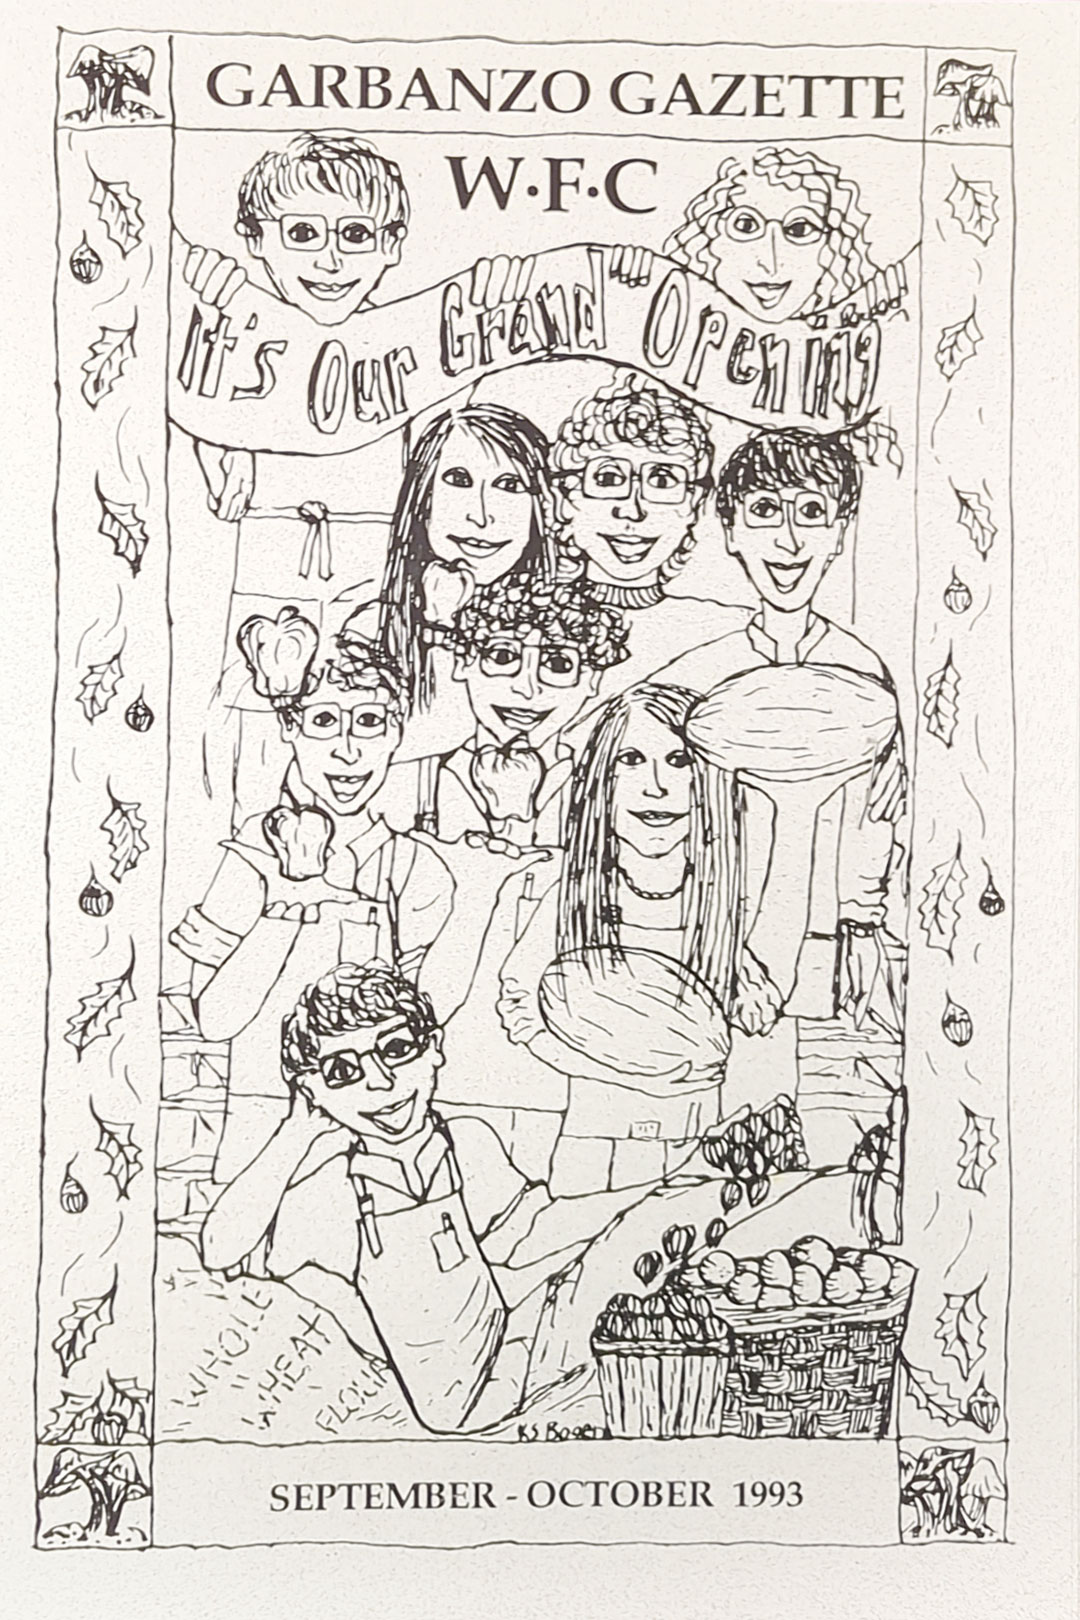 Black and white illustrated cover of "Garbanzo Gazette W.F.C" for September-October 1993. Eight people hold a banner stating "It's Our Grand Opening" amidst a festive border with holly leaves. Baskets of vegetables, representing Whole Foods Coop Duluth MN, are visible at the bottom right.